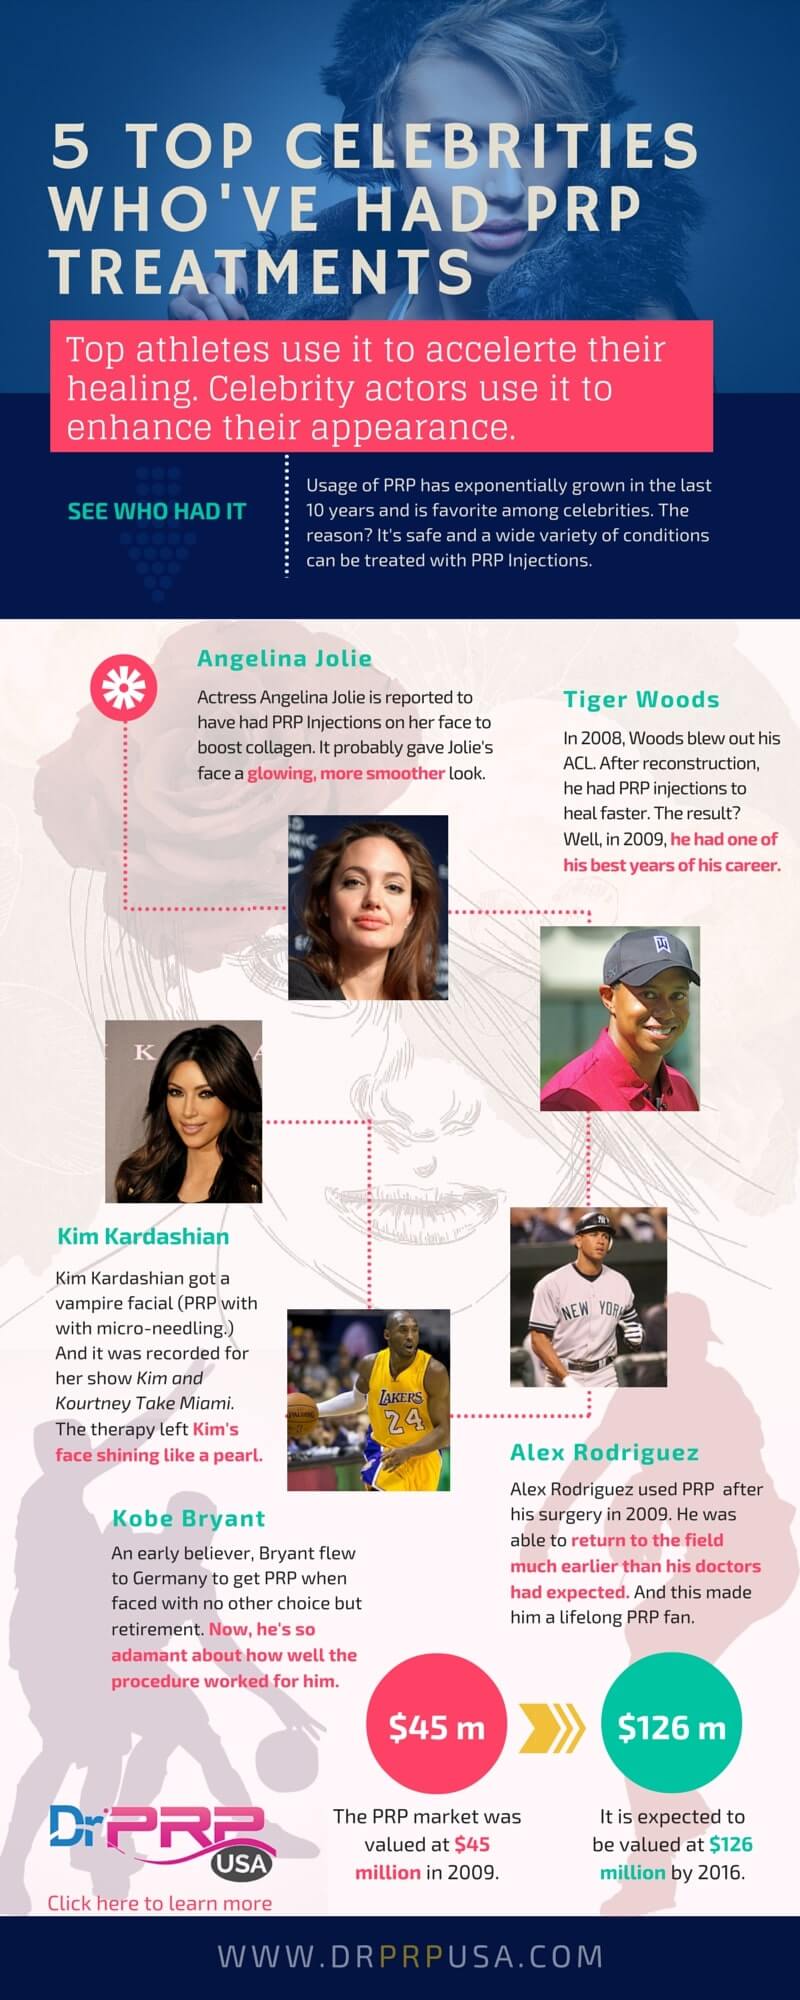 5 Top Celebrities Who’ve Had PRP Treatments [INFOGRAPHIC]